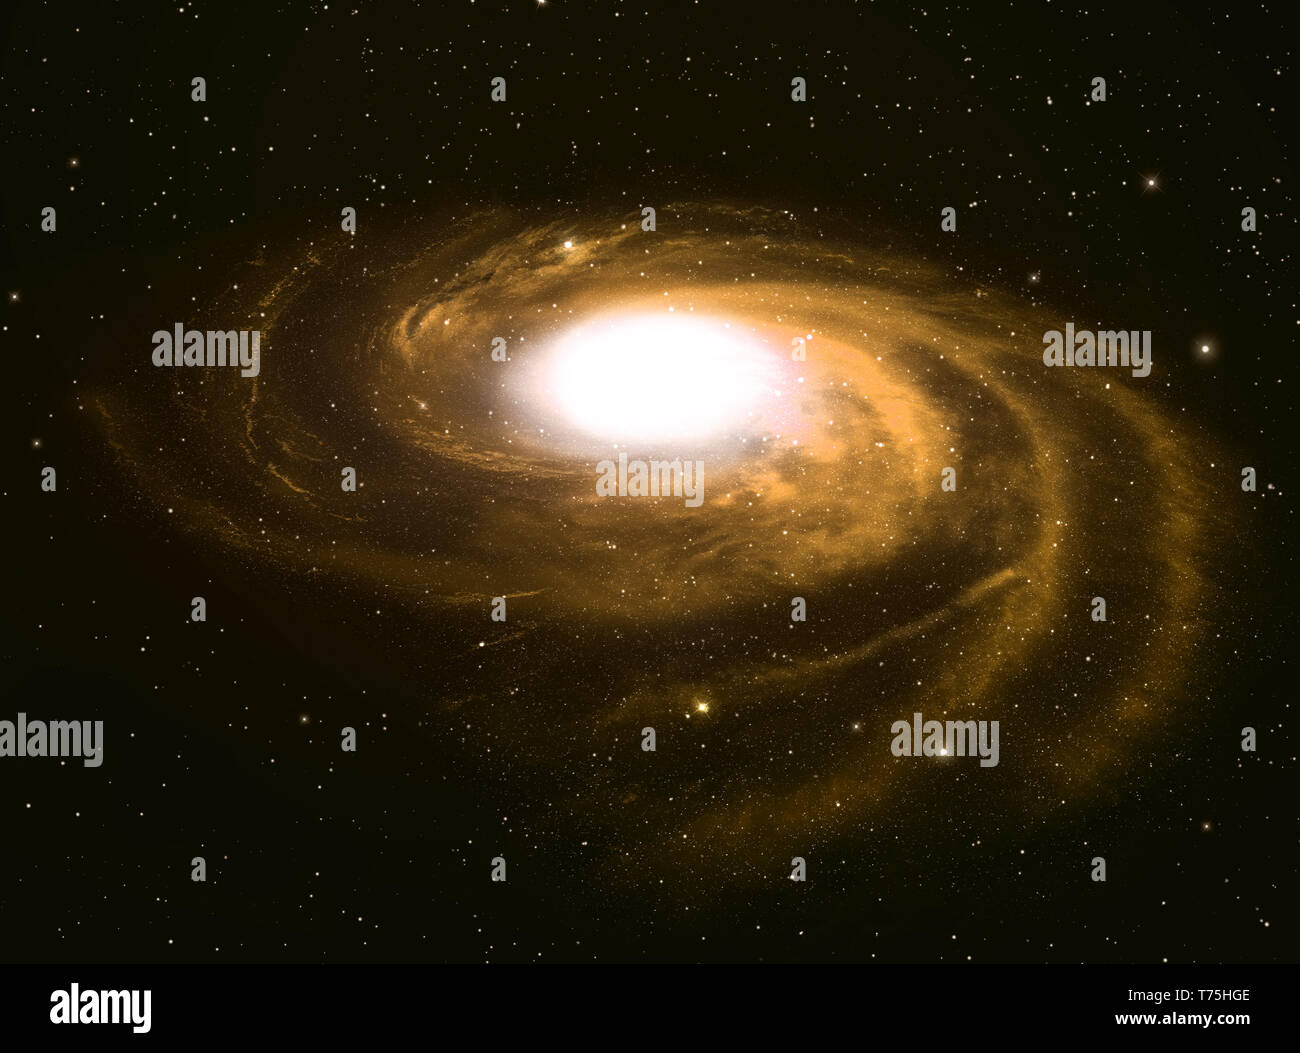 Spiral galaxy in deep space. Stock Photo